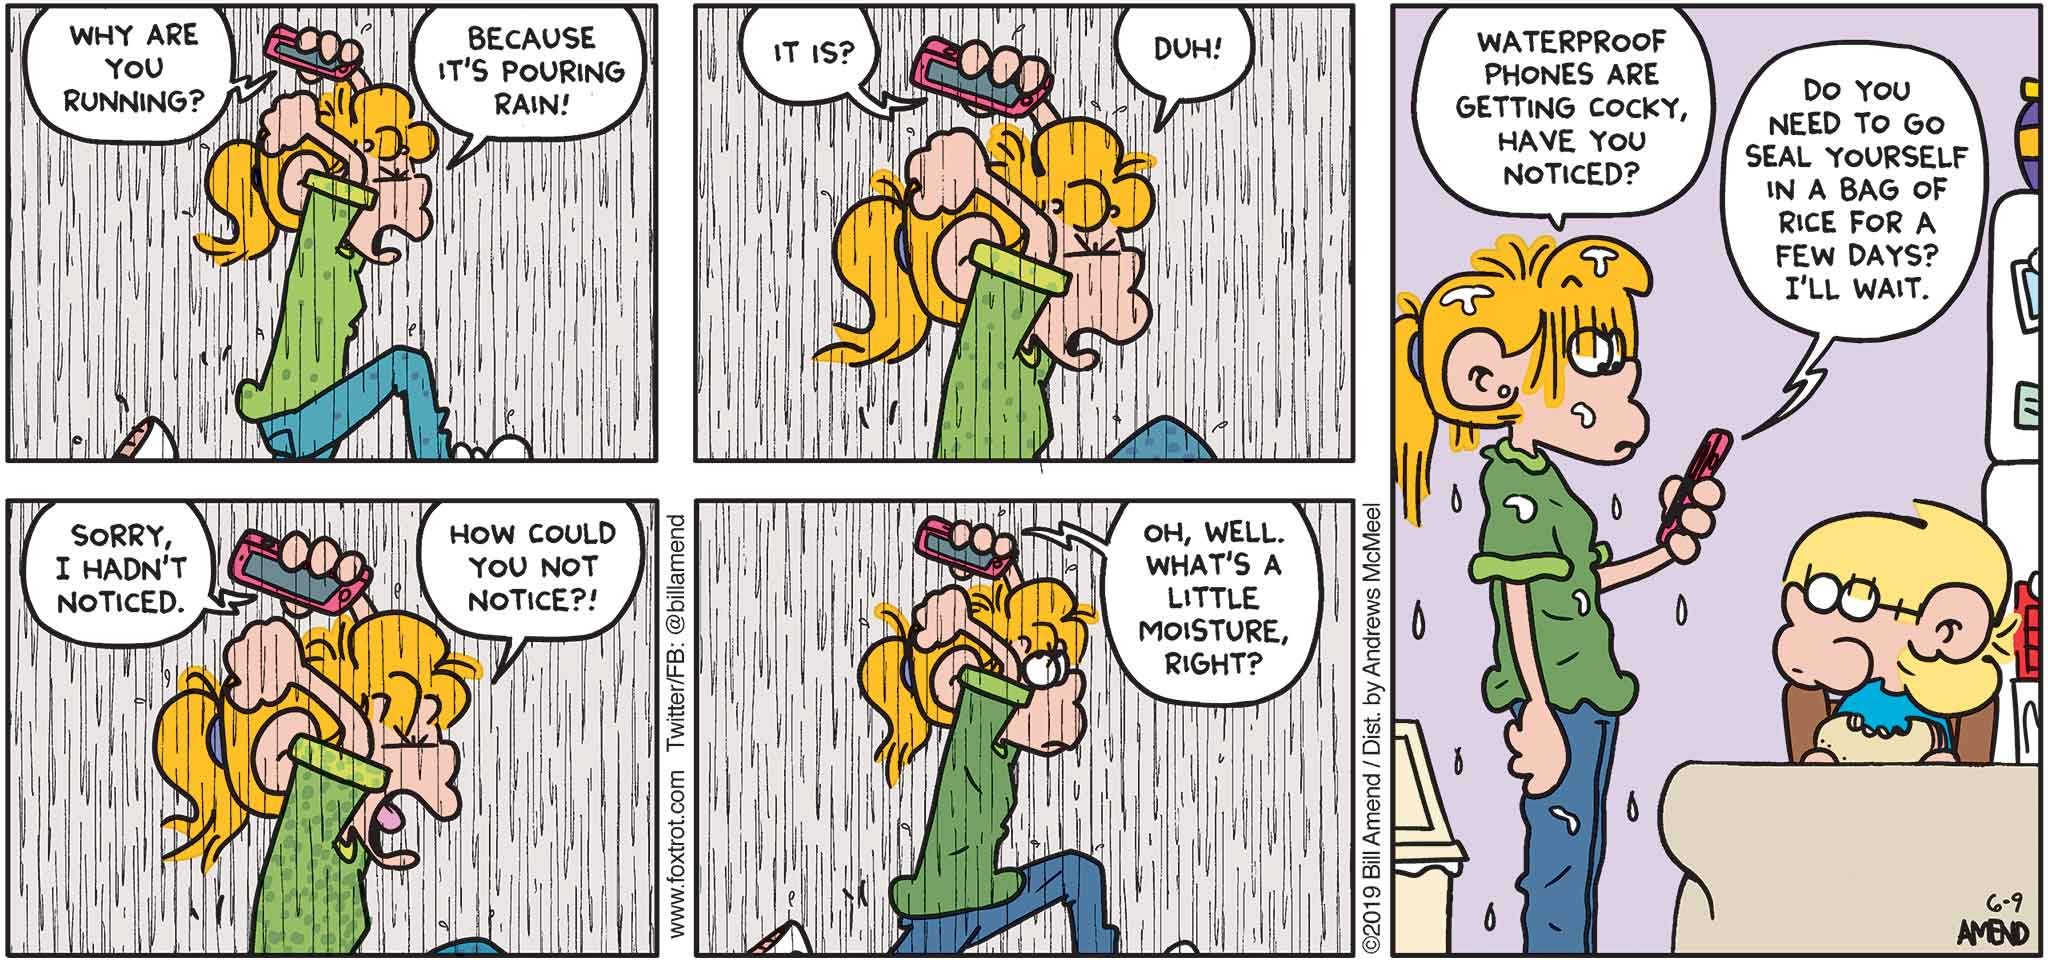 FoxTrot by Bill Amend - "Smart-Ass Phone" published June 9, 2019 - Phone: Why are you running? Paige: Because it's pouring rain! Phone: It is? Paige: Duh! Phone: Sorry, I hadn't noticed. Paige: How could you not notice?! Paige: Oh, well. What's a little moisture, right? Paige: Waterproof phones are getting cocky, have you noticed? Phone: Do you need to seal yourself in a bag of rice for a few days? I'll wat.